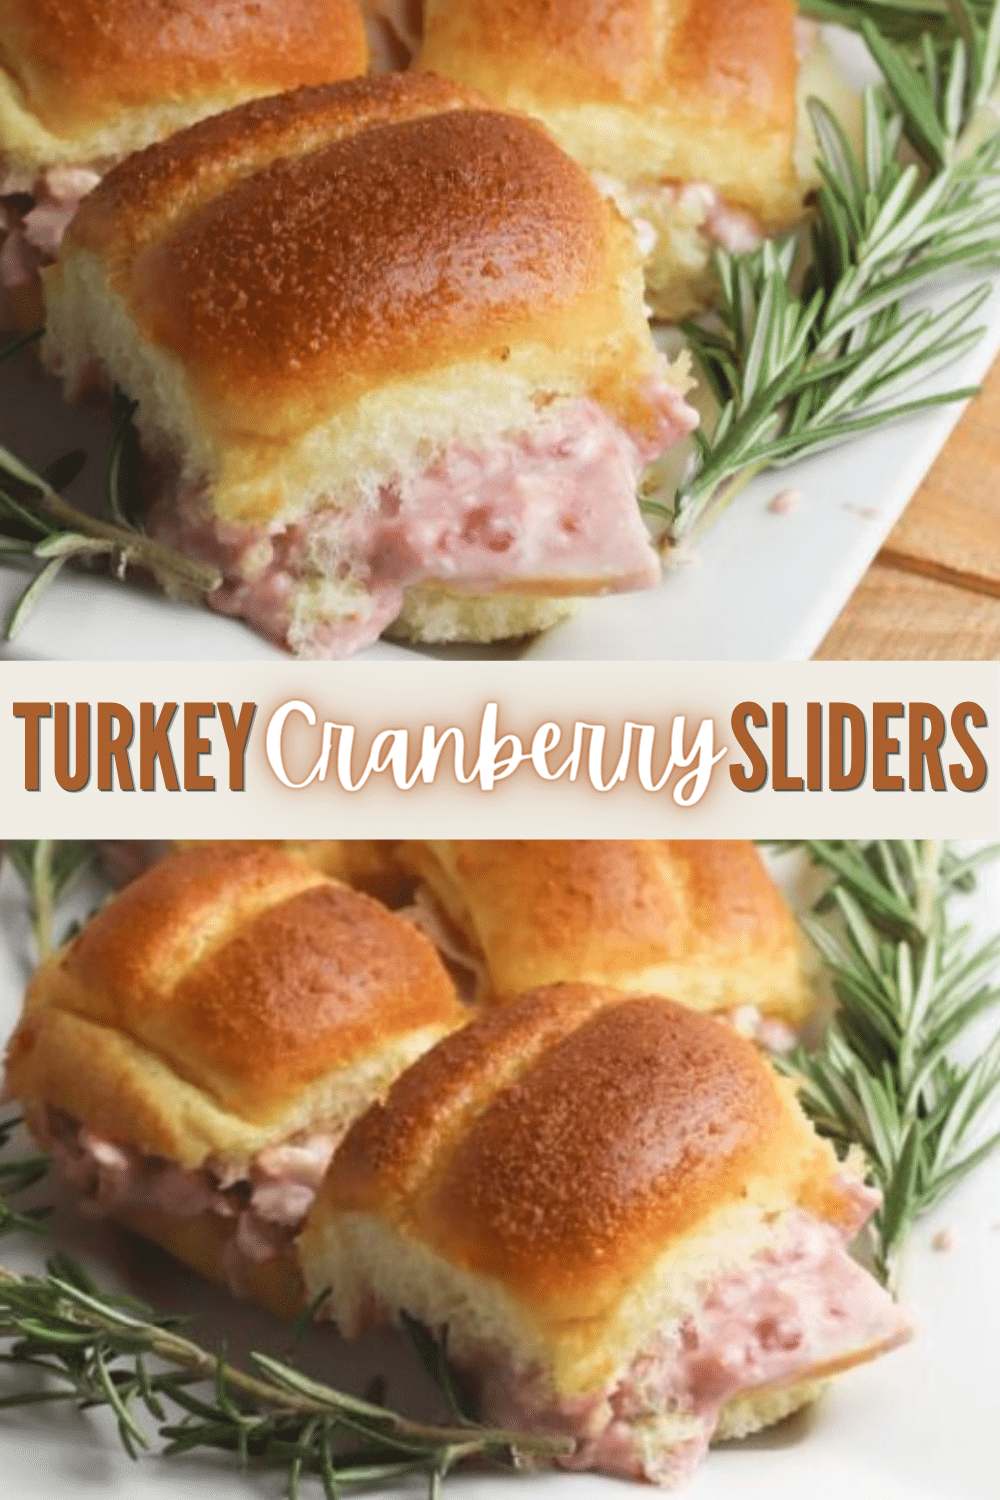 Turkey cranberry sliders with rosemary sprigs are a delicious and flavorful dish that combines the savory taste of turkey with the tangy sweetness of cranberry sauce. These sliders are perfect for holiday gatherings or